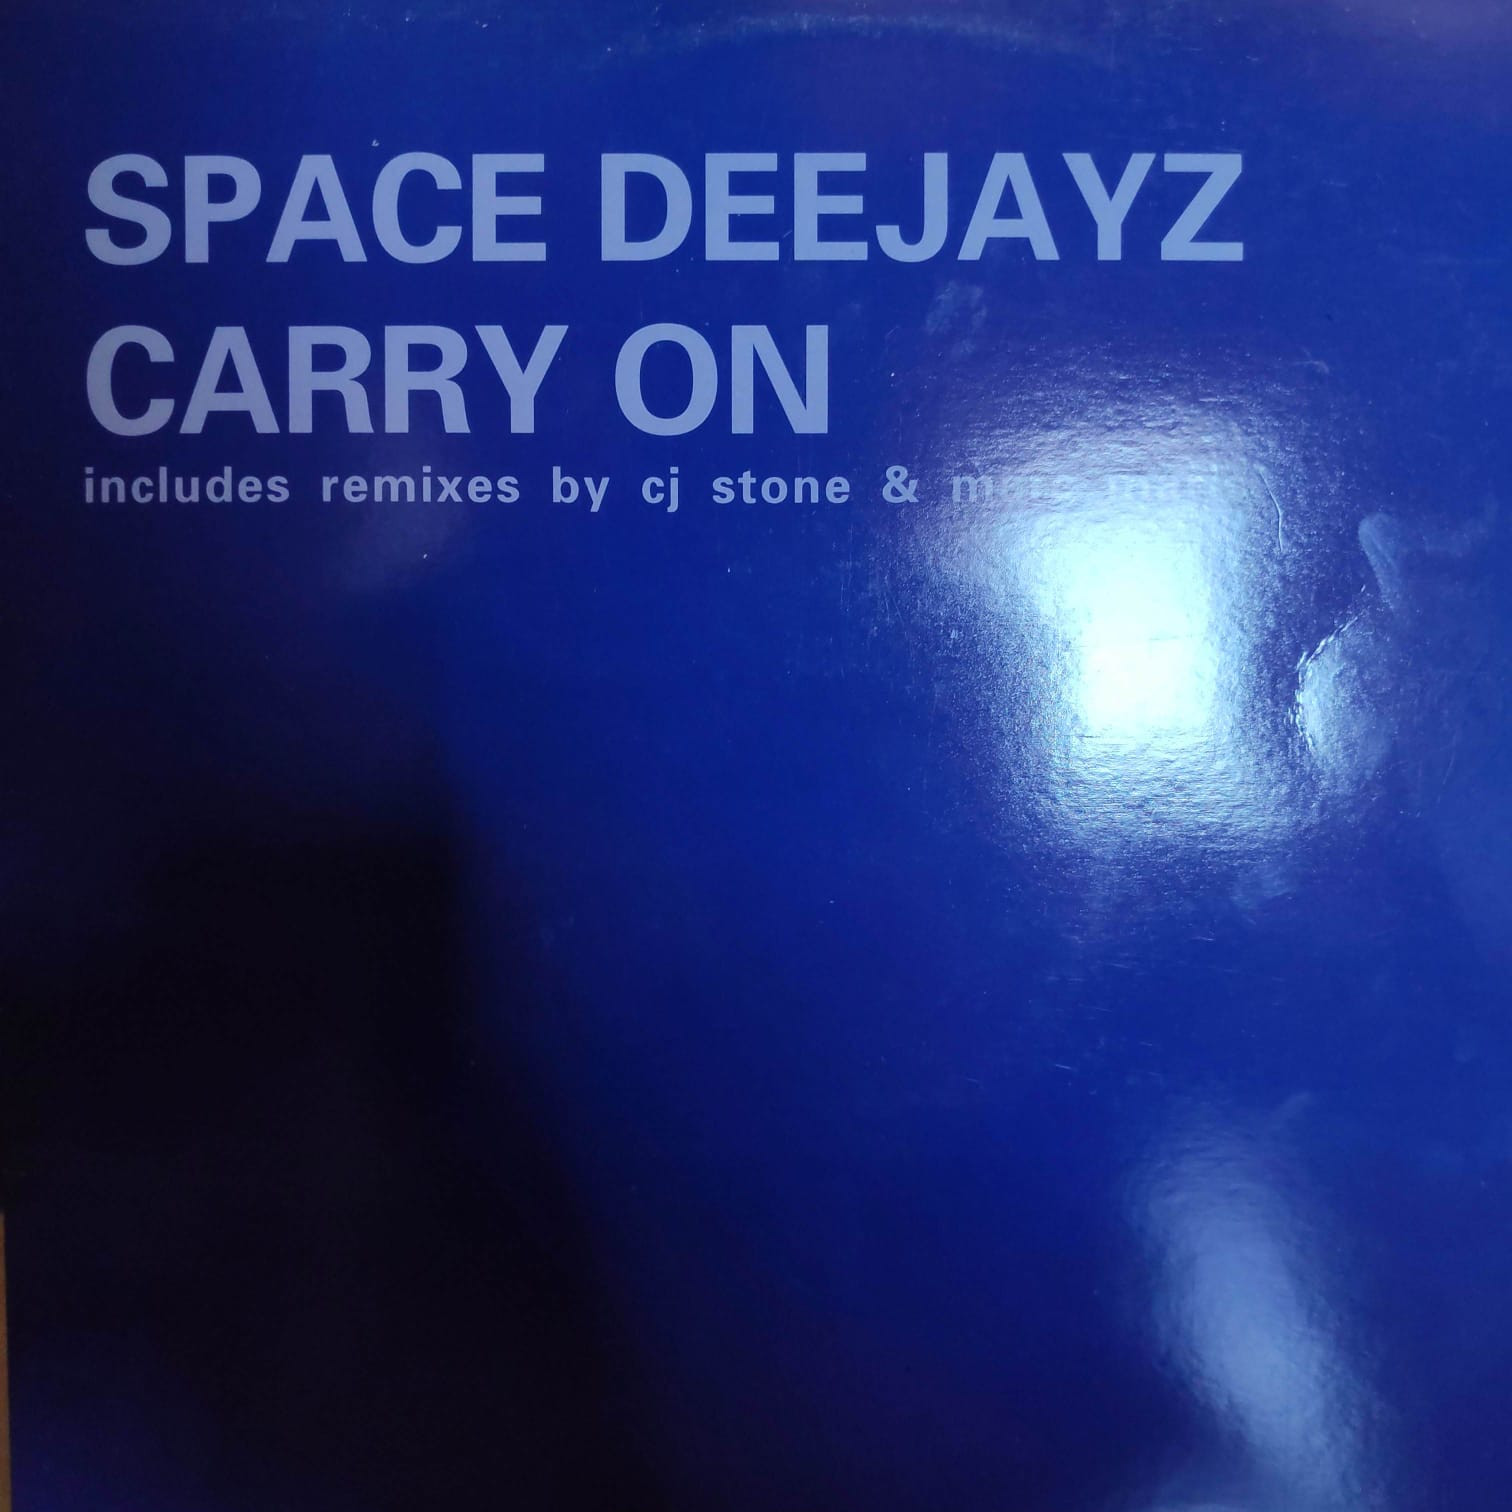 (2623) Space Deejayz ‎– Carry On